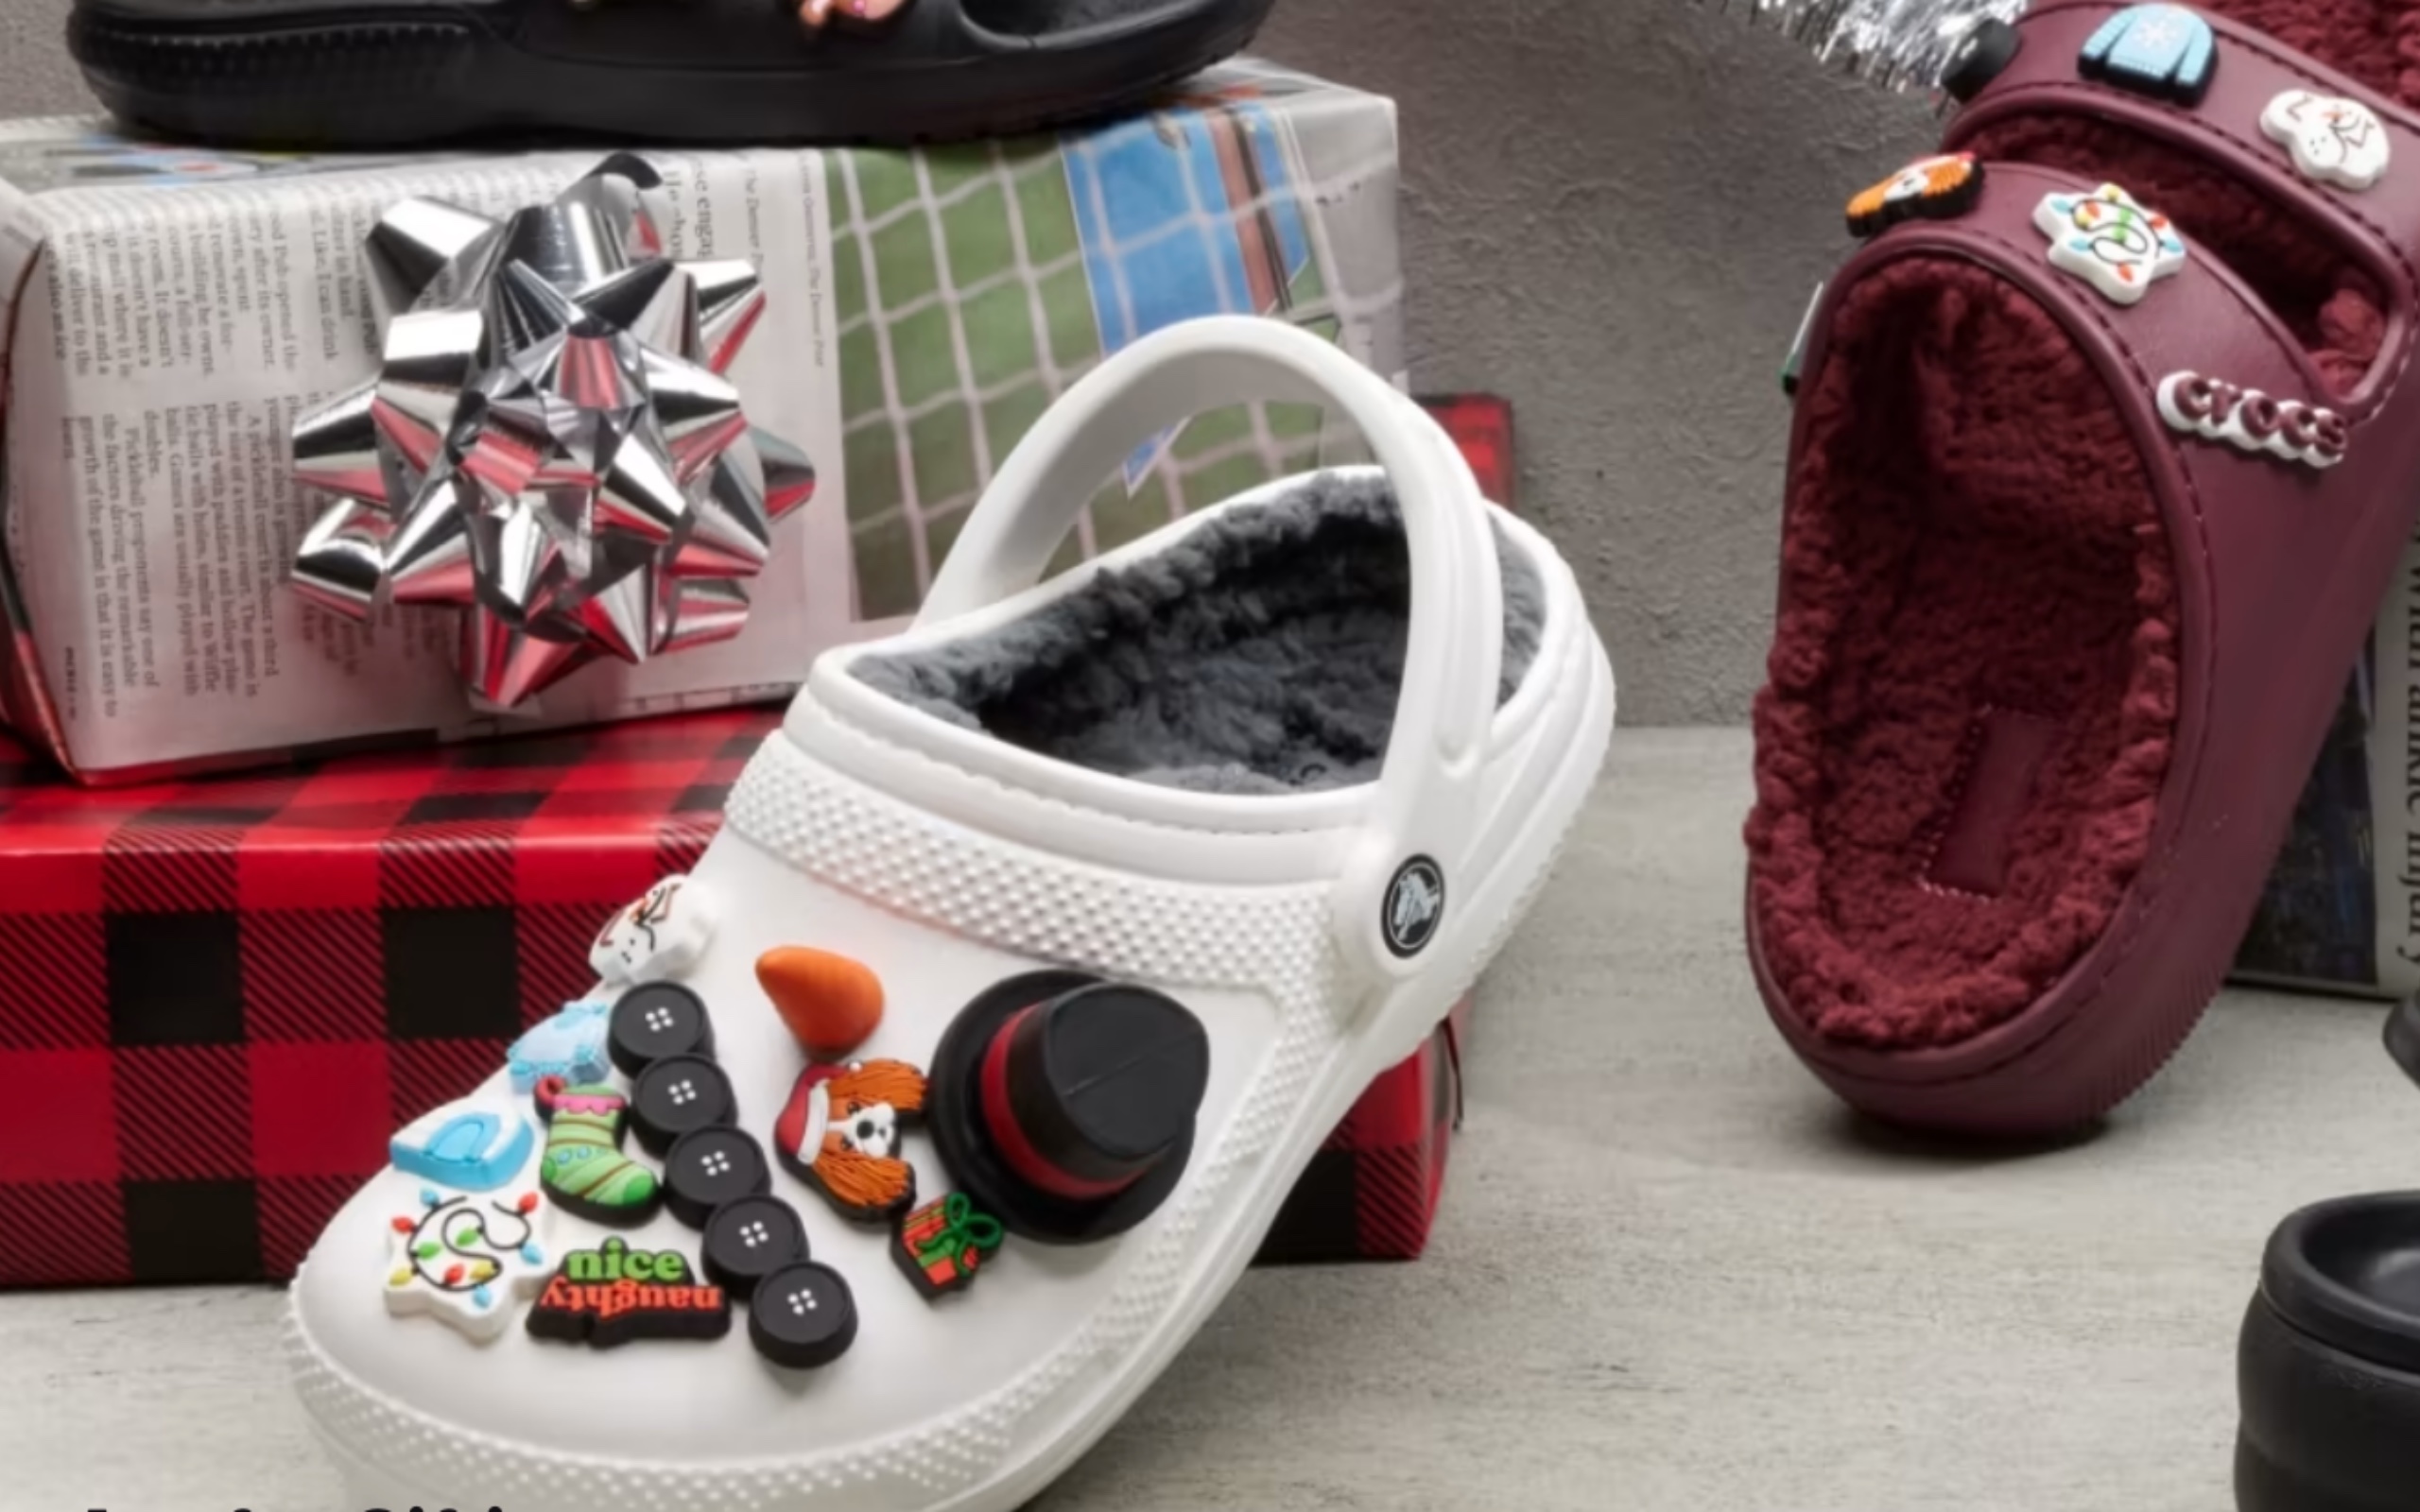 Crocs drops holiday deals up to 50% off with over 250 styles: Clogs,  sneakers, boots, more